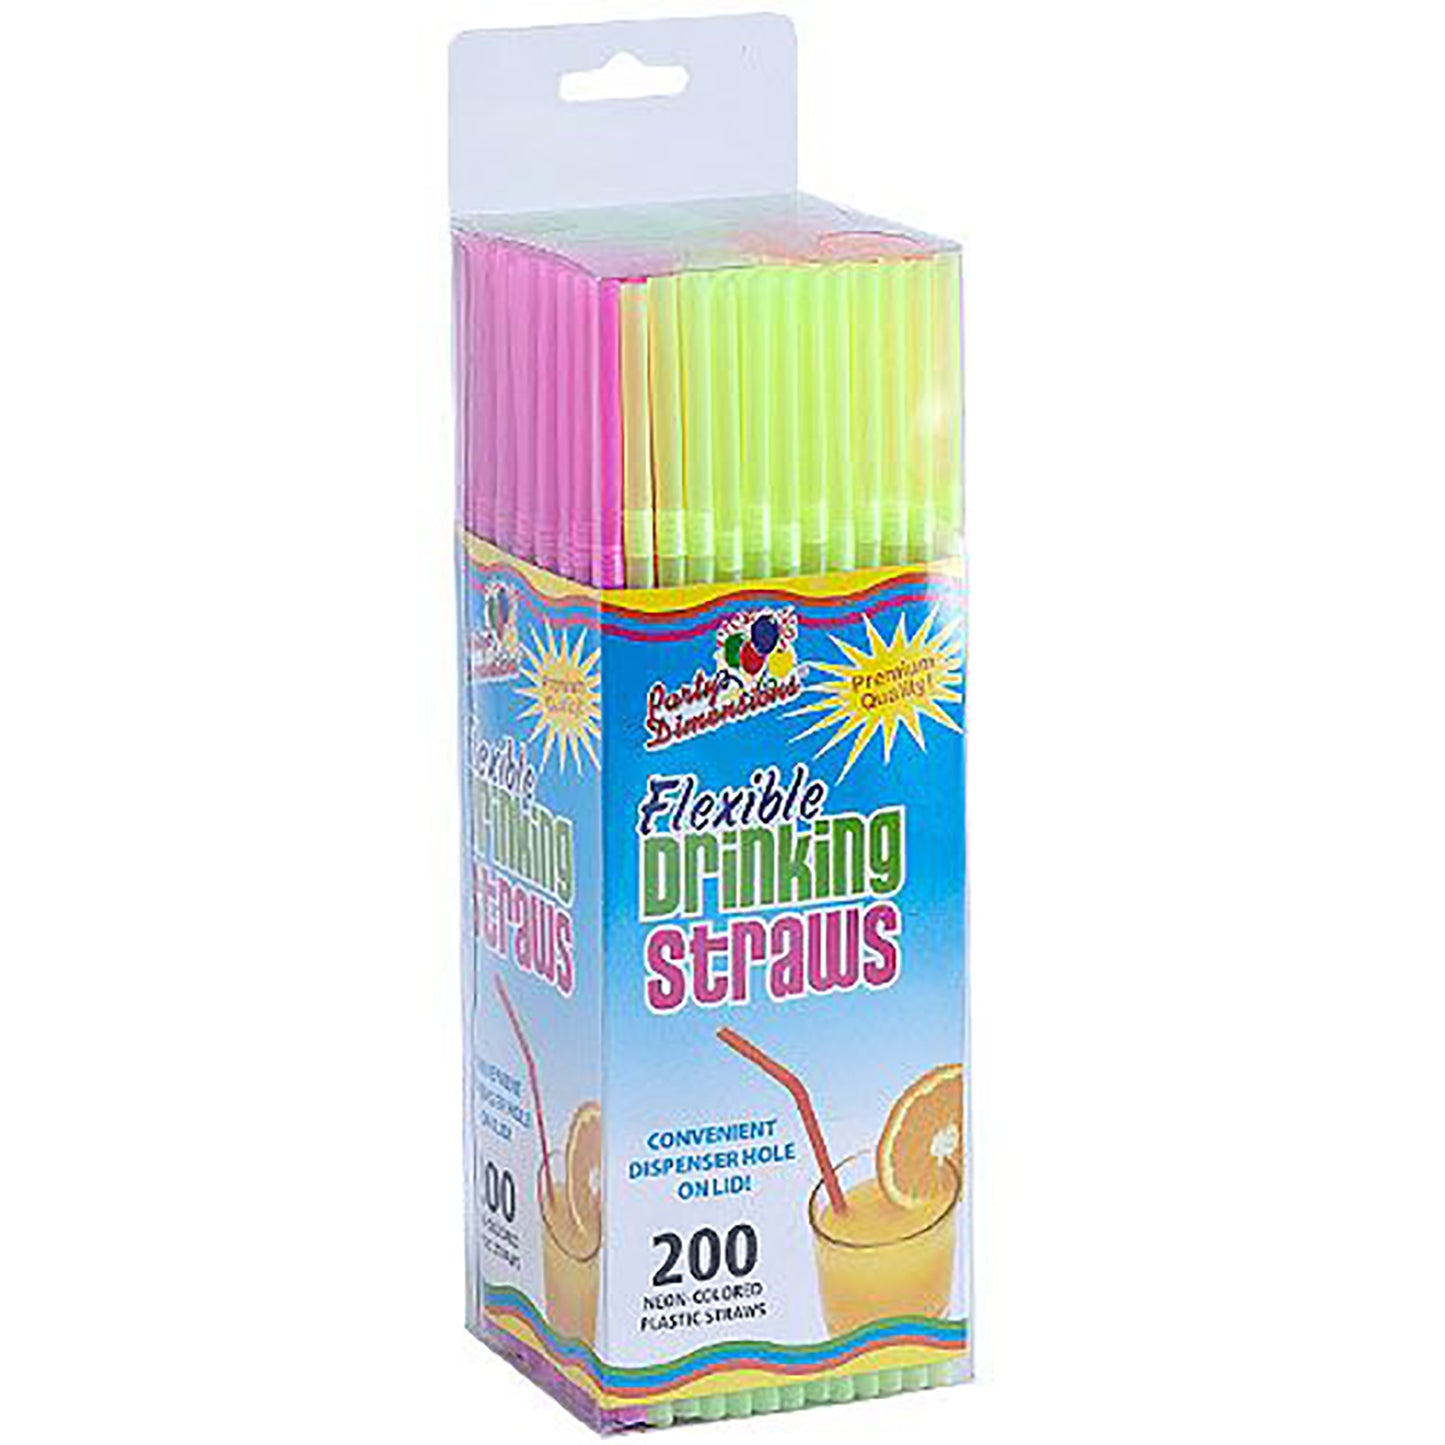 Straws Flexible Neon Multi-Colored 8.5-9.5 inches Tops & Straw Party Dimensions   